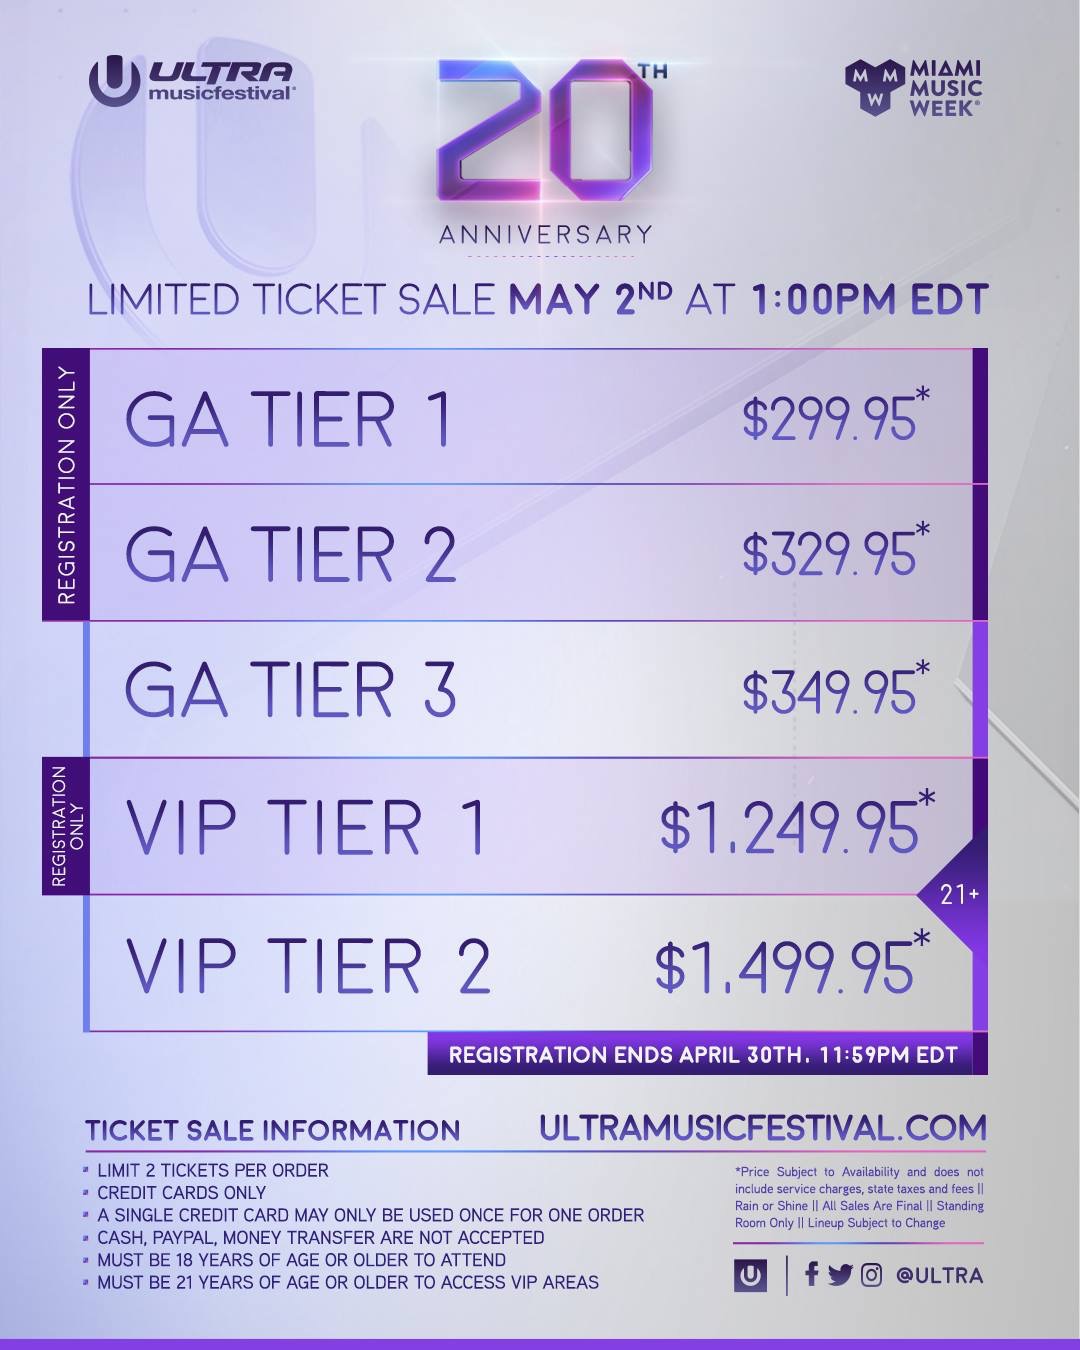 Ultra Music Festival 2018 Tickets on Sale For 20th Anniversary The